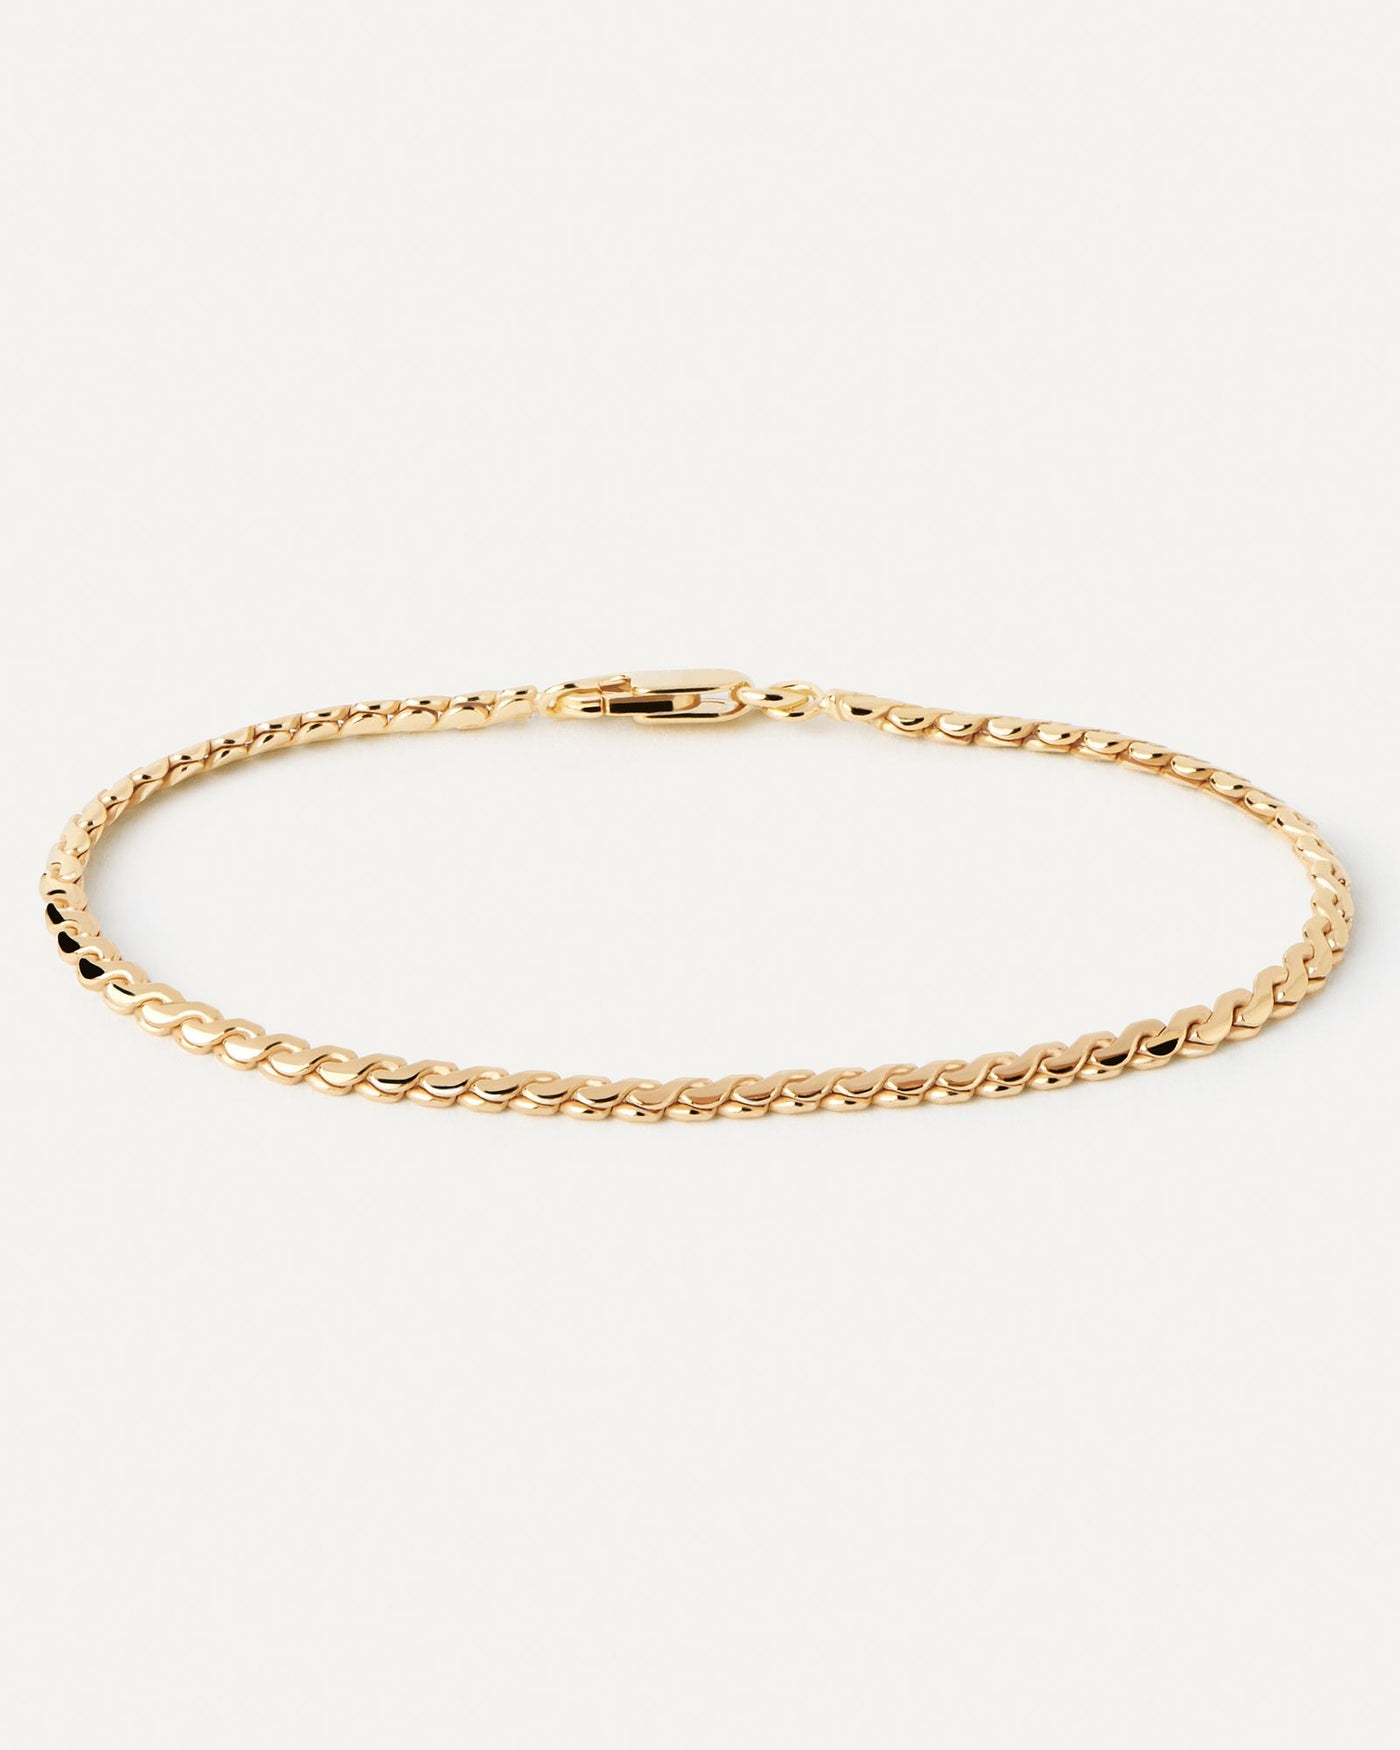 2024 Selection | Serpentine Chain Bracelet. Modern gold-plated serpentine chain bracelet with braided links. Get the latest arrival from PDPAOLA. Place your order safely and get this Best Seller. Free Shipping.